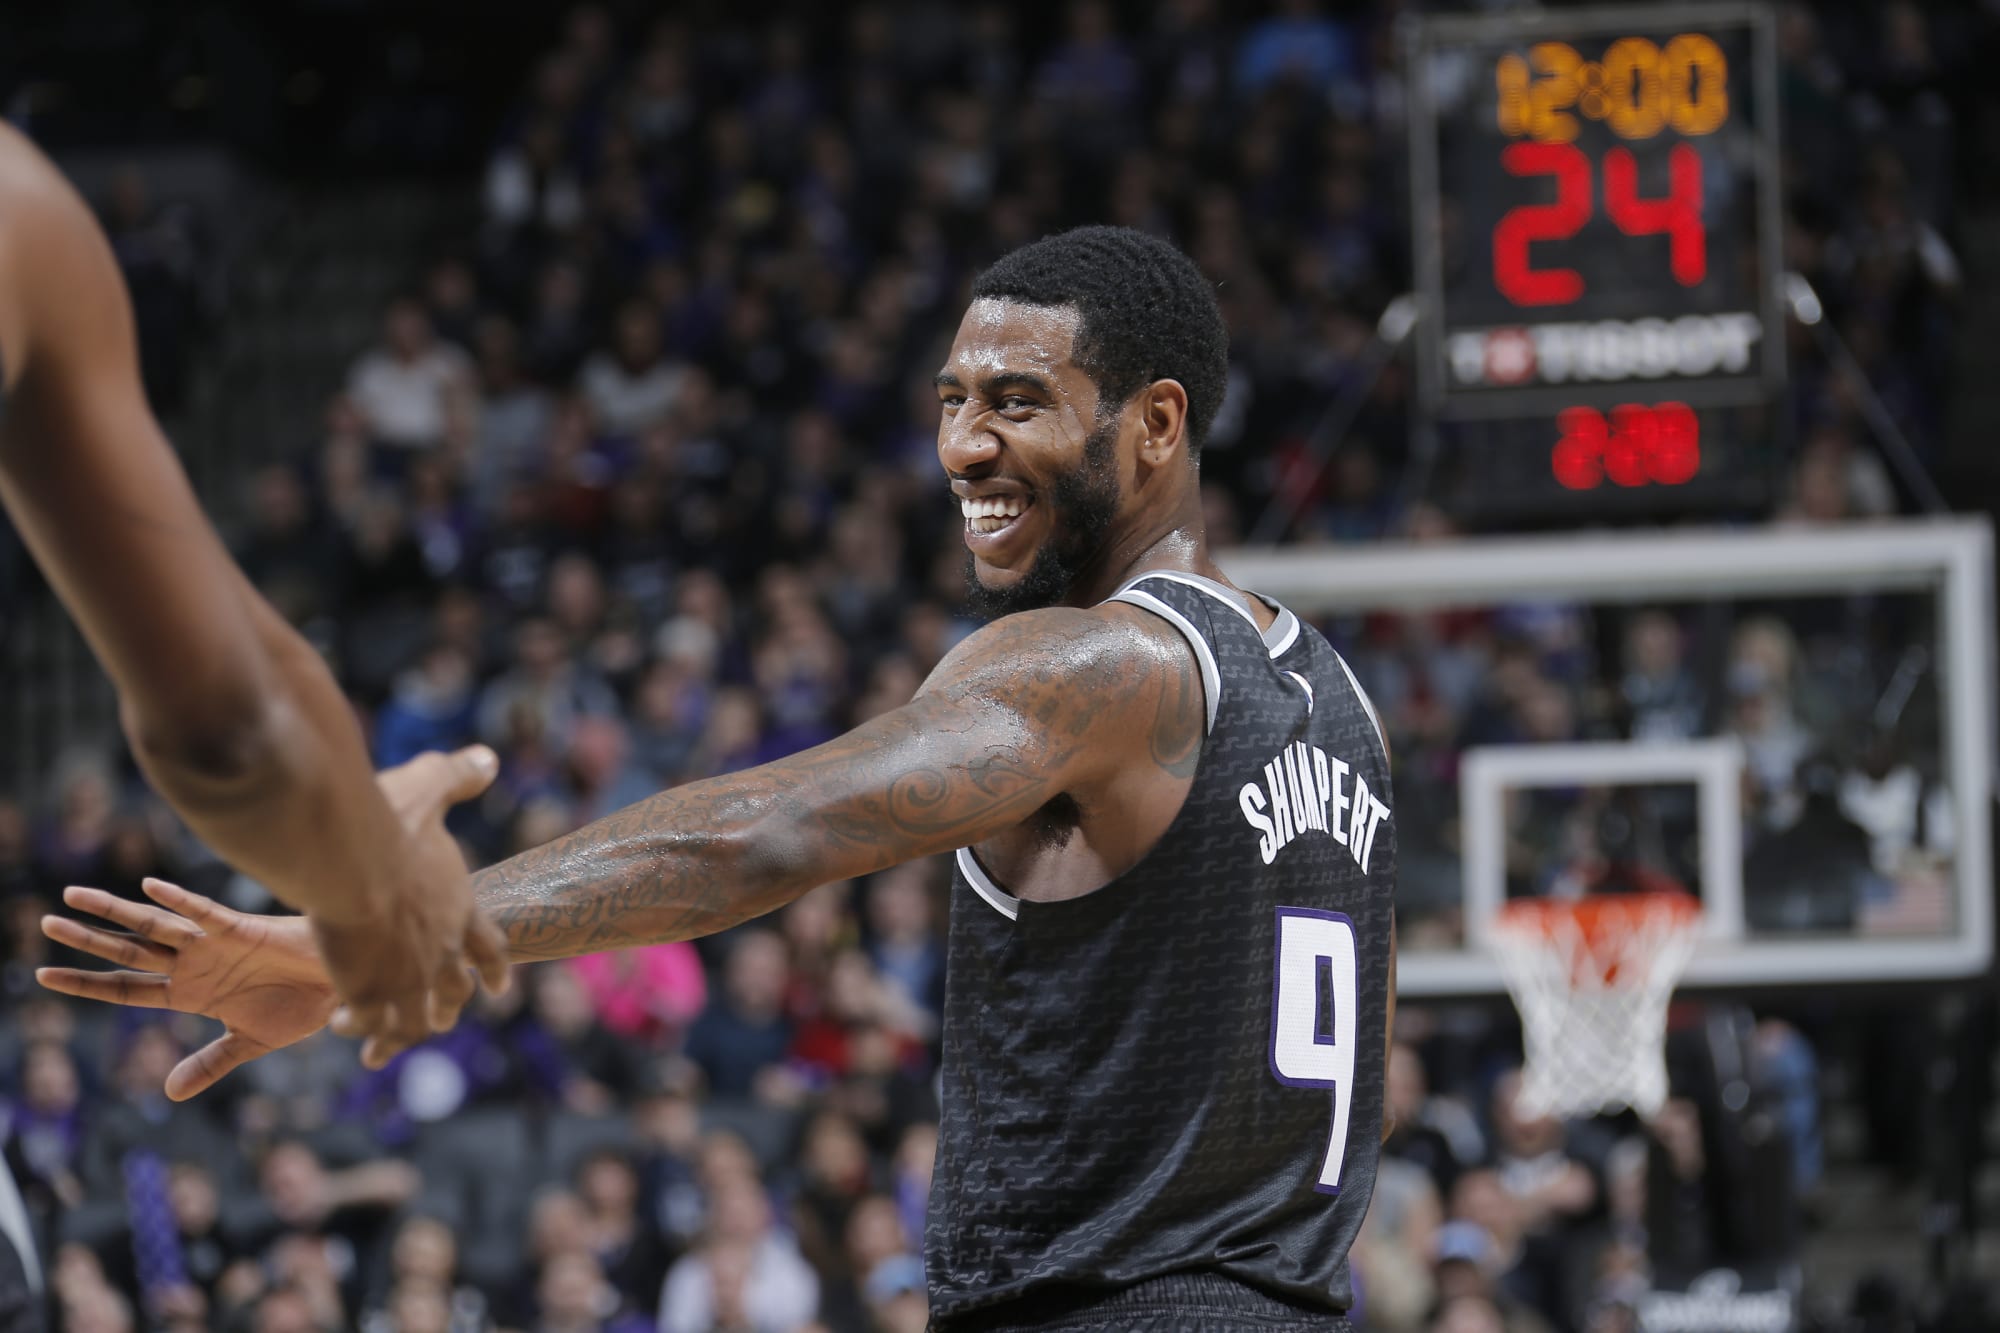 Sacramento Kings: Ariza Out For Preseason, Could Shumpert Be In?